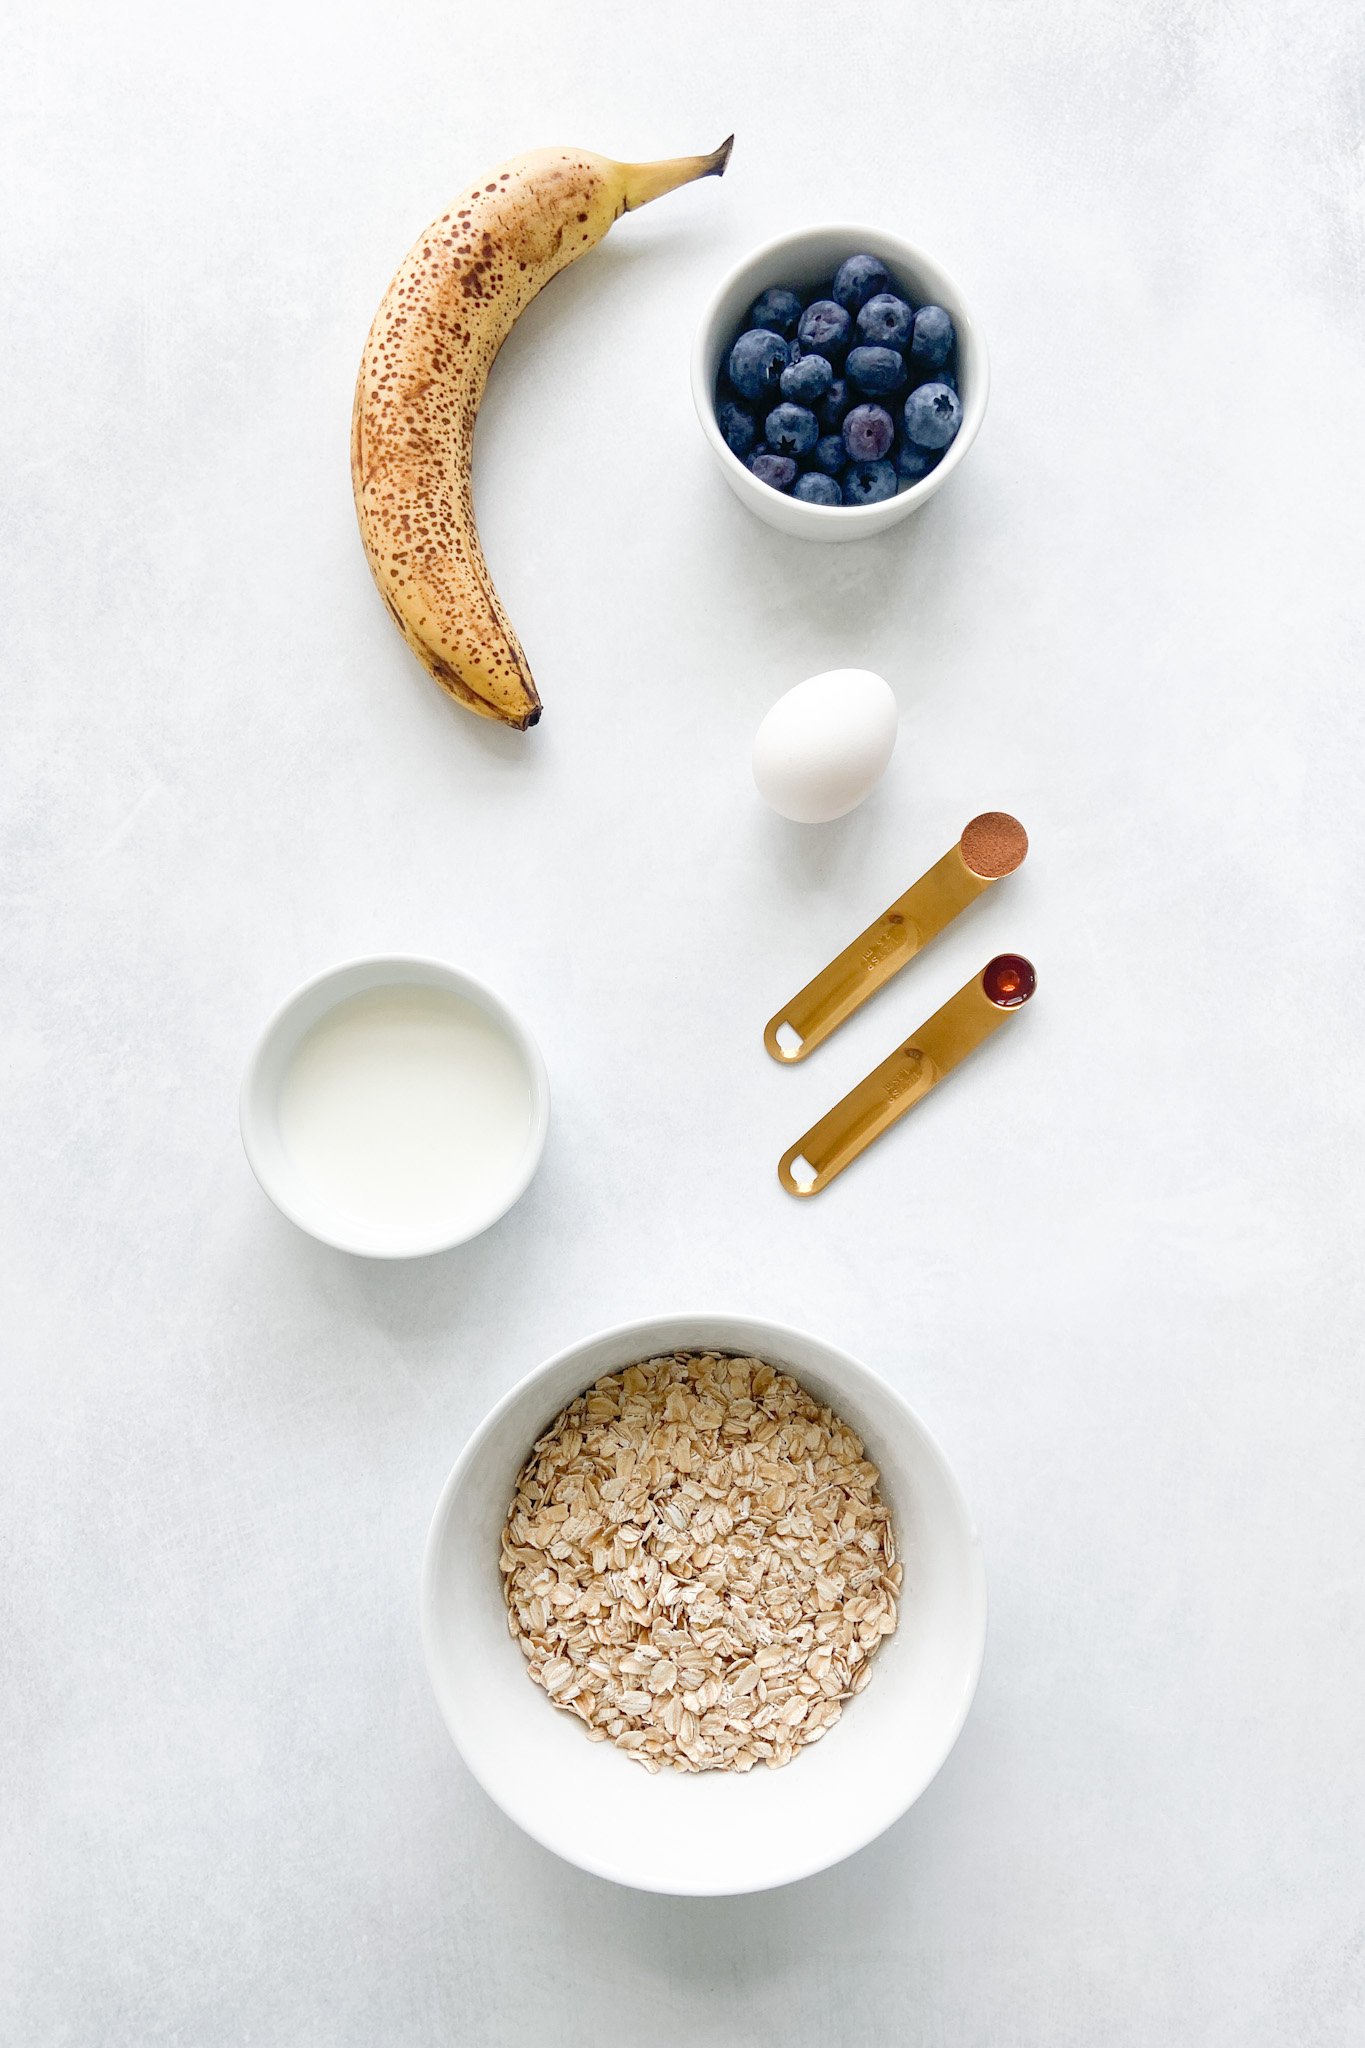 Ingredients to make blueberry banana oatmeal bites. See recipe card for detailed ingredient quantities.